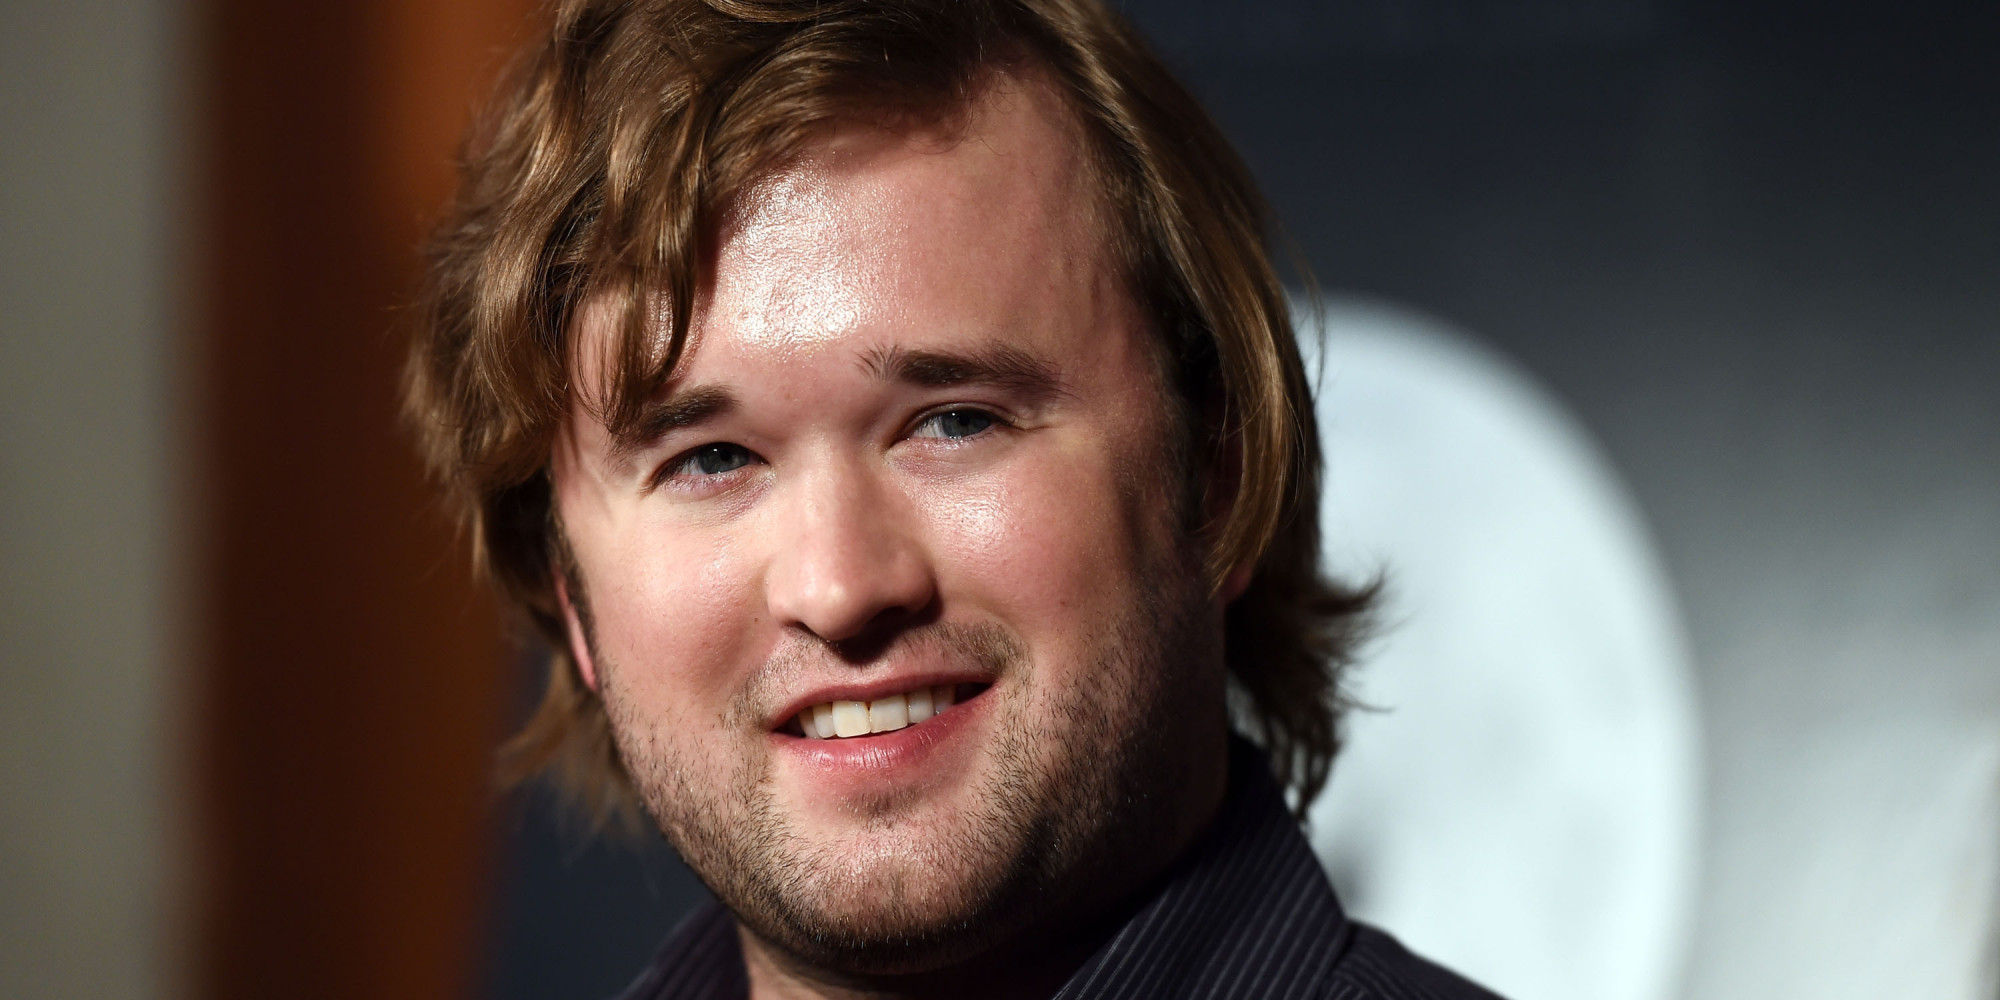 Haley Joel Osment Wallpaper Image Photos Pictures Background